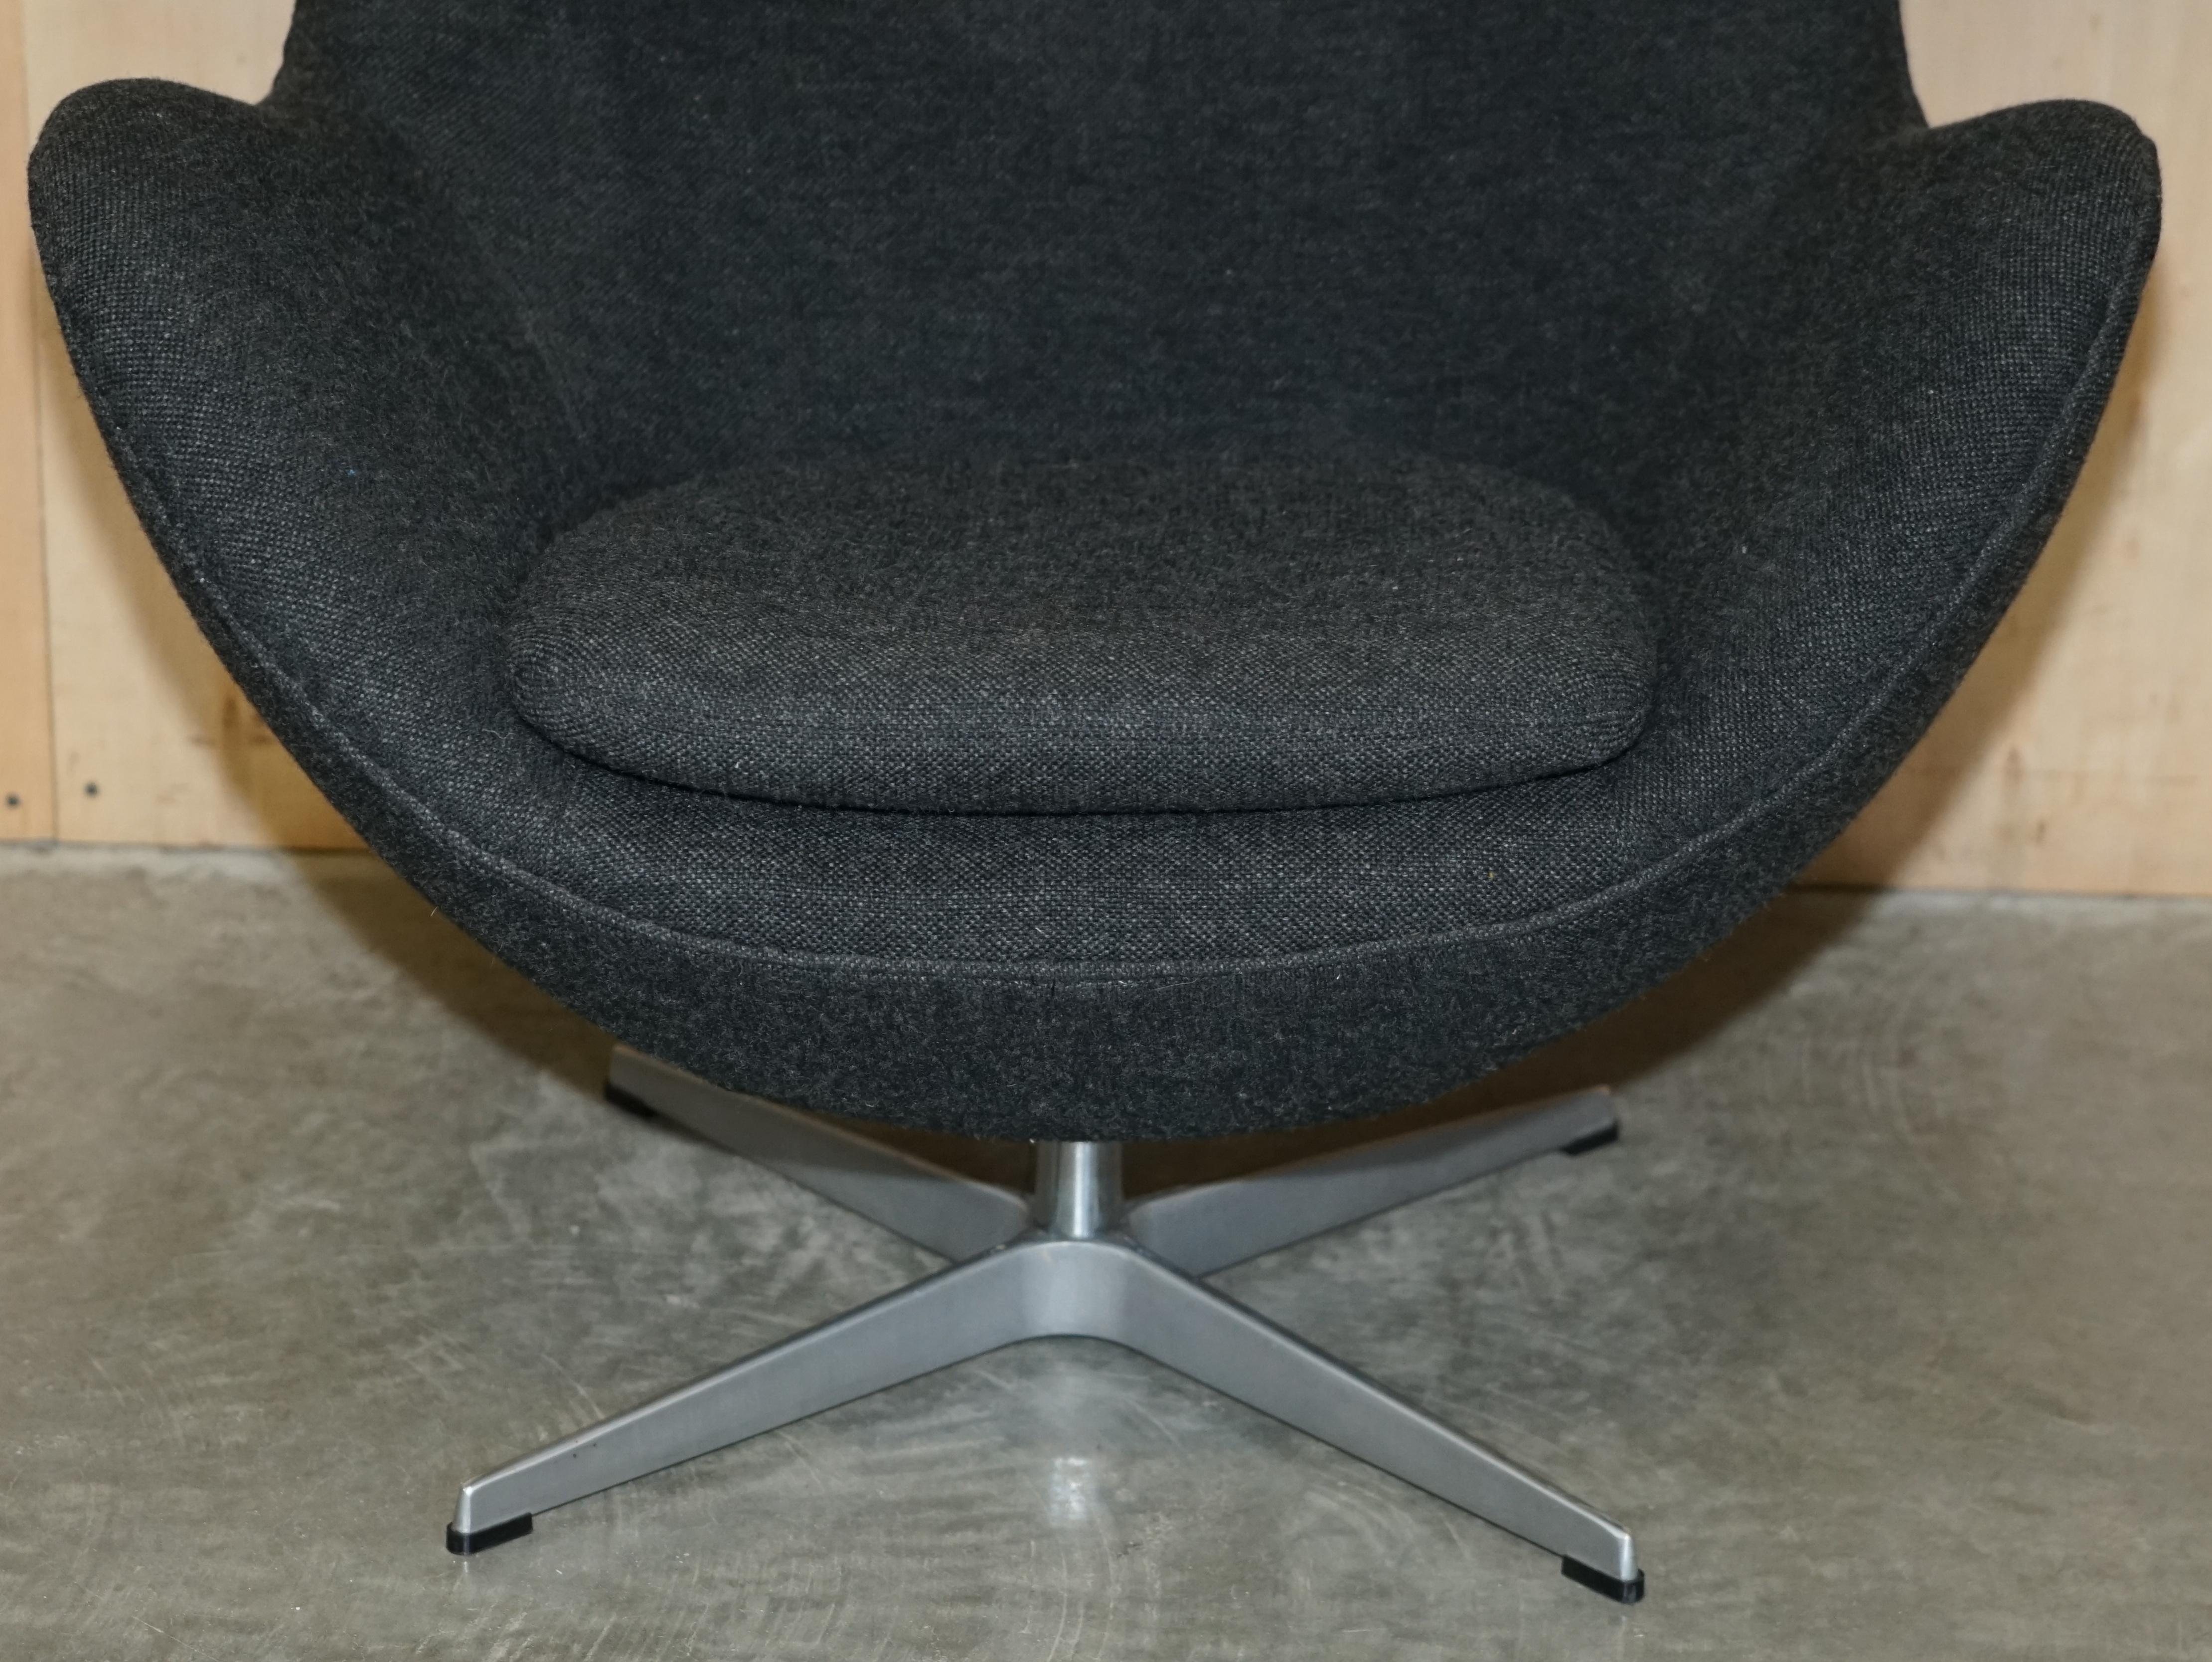 Upholstery Original 1996 Stamped Fritz Hansen Egg Chair in Black / Grey Fabric For Sale